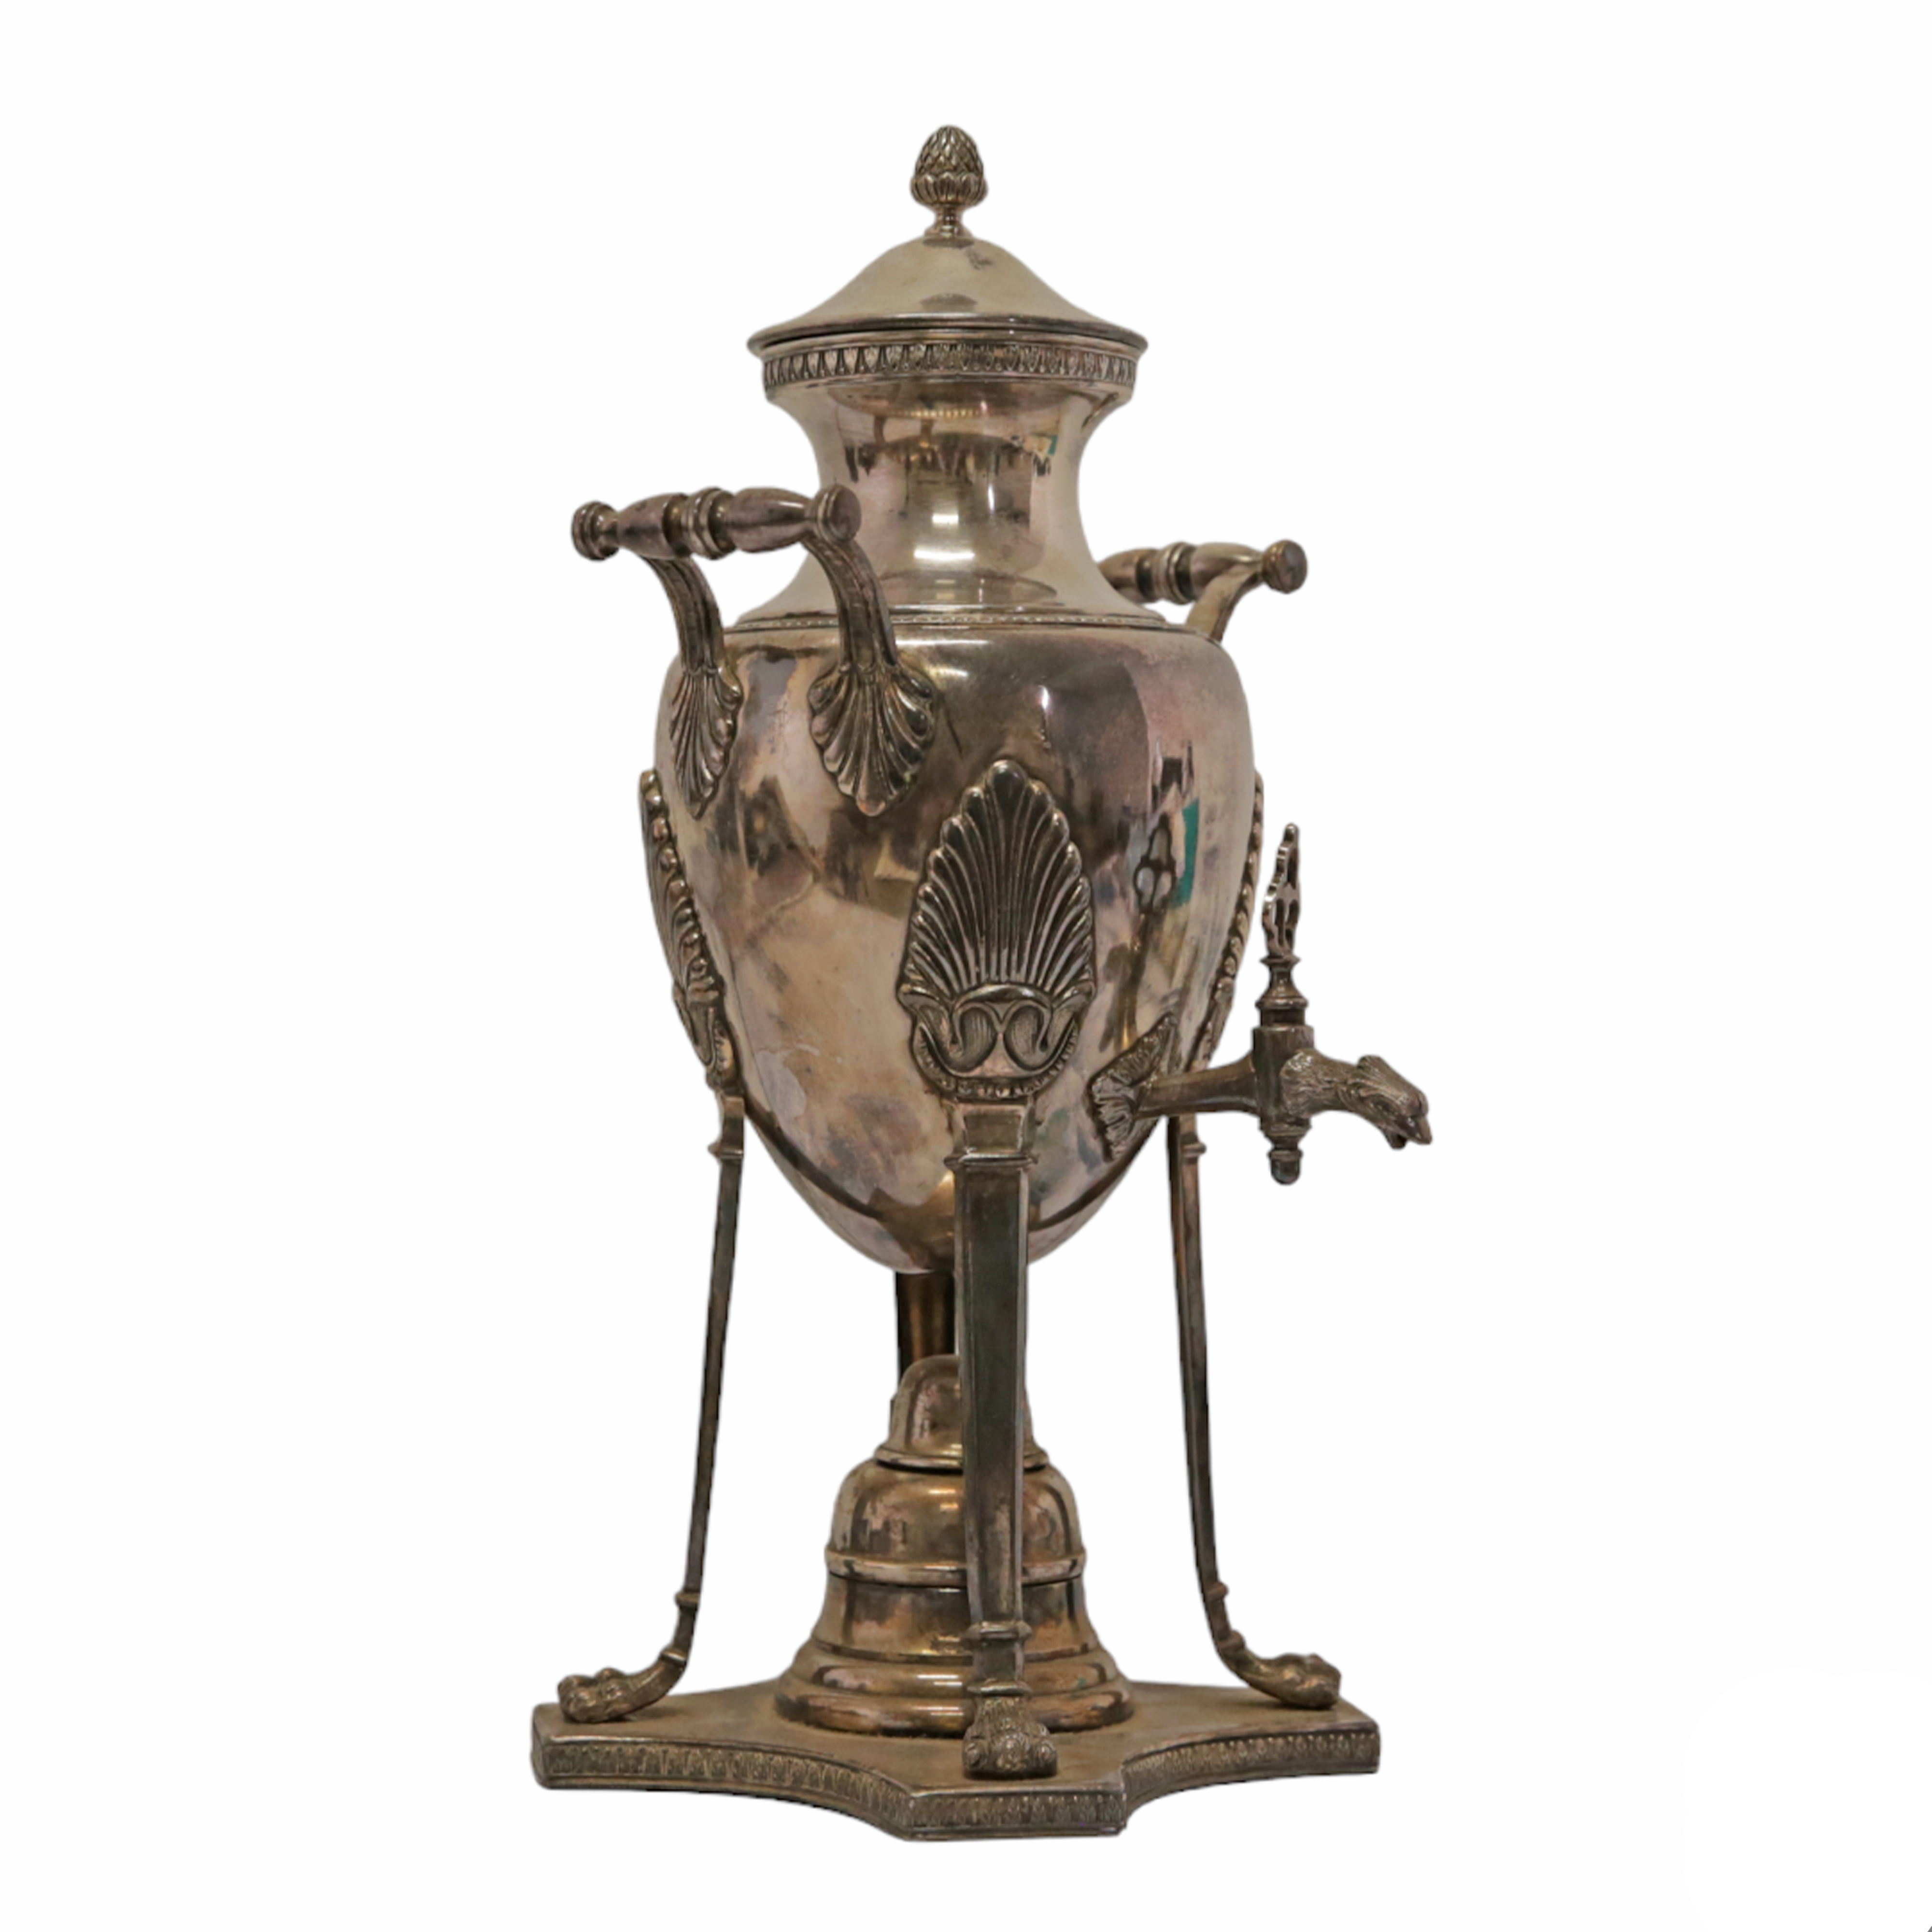 Rare Silver Plate Samovar, Large coffee urn with Neoclassical motifs, France 19th century. - Image 9 of 11